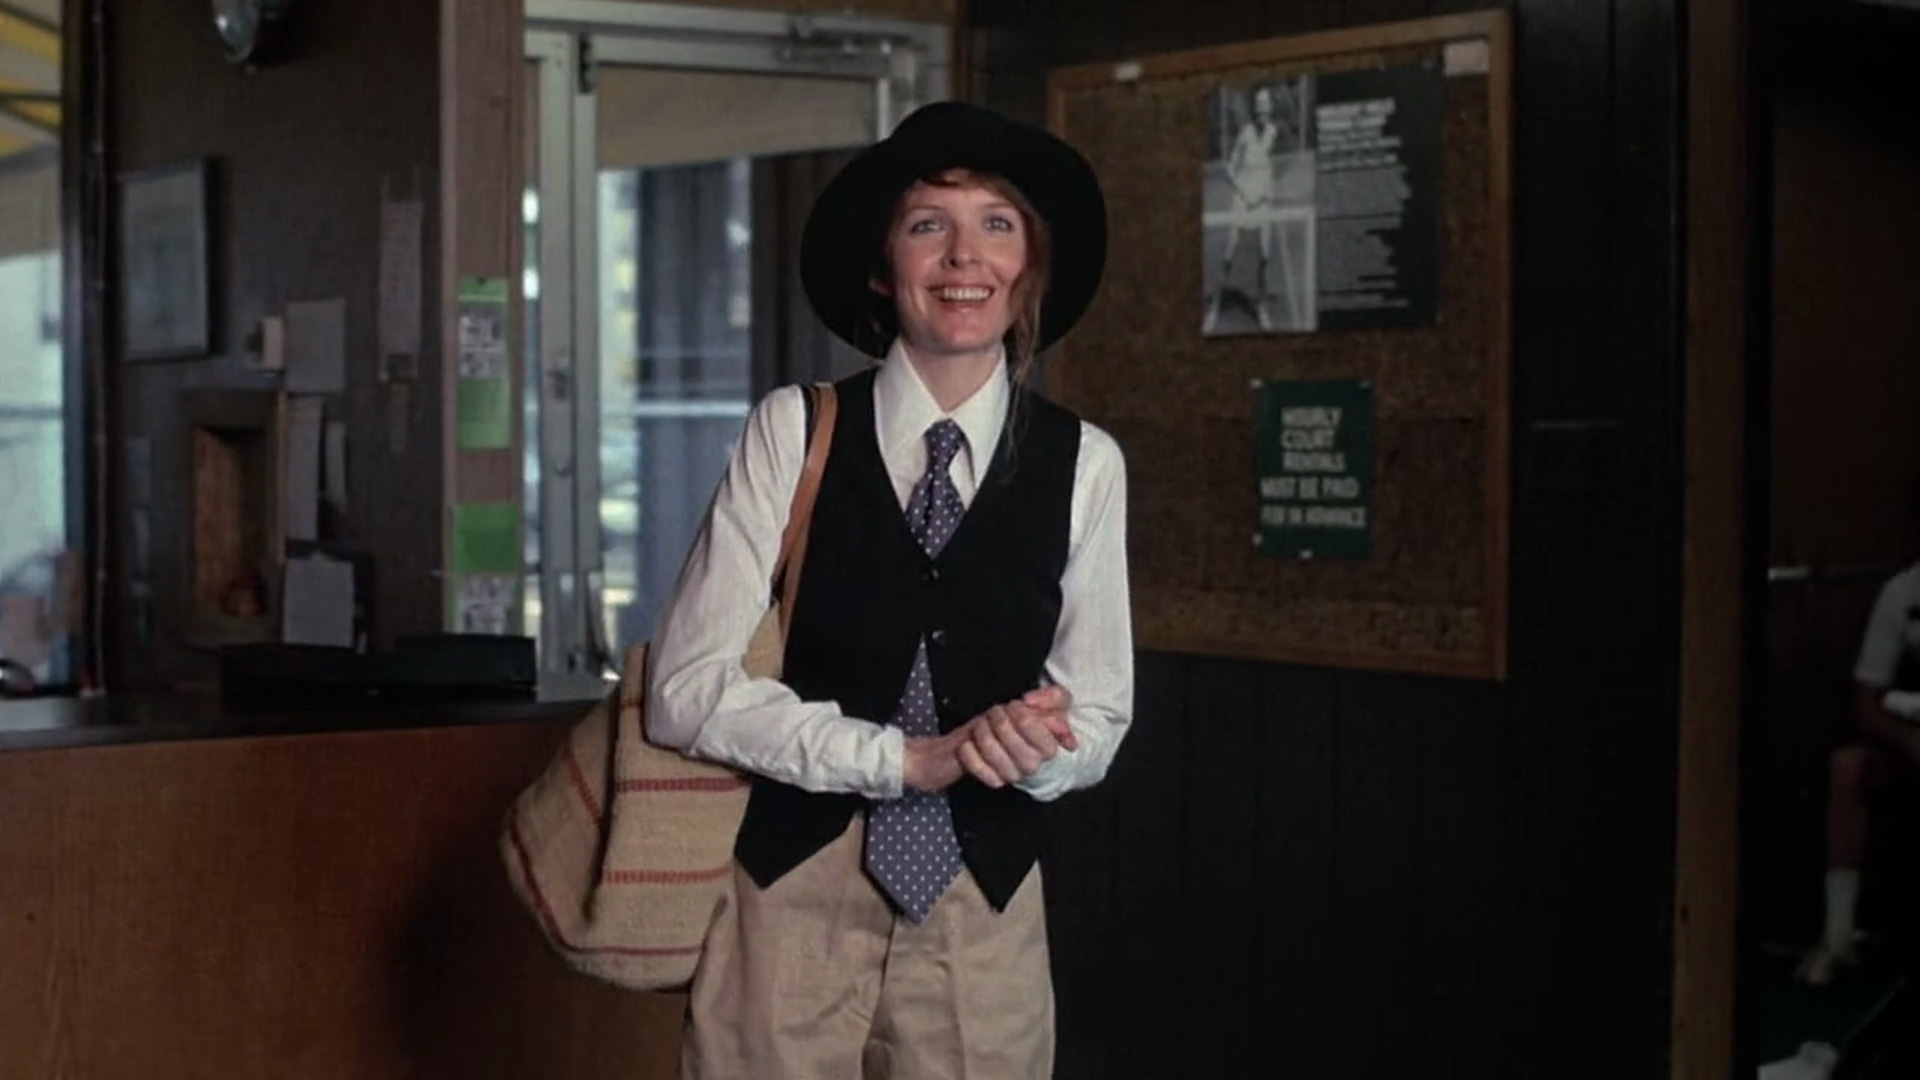 April 20, 1977: "Annie Hall" Was Released and Diane Keaton Introduced the World to Her Iconic Style